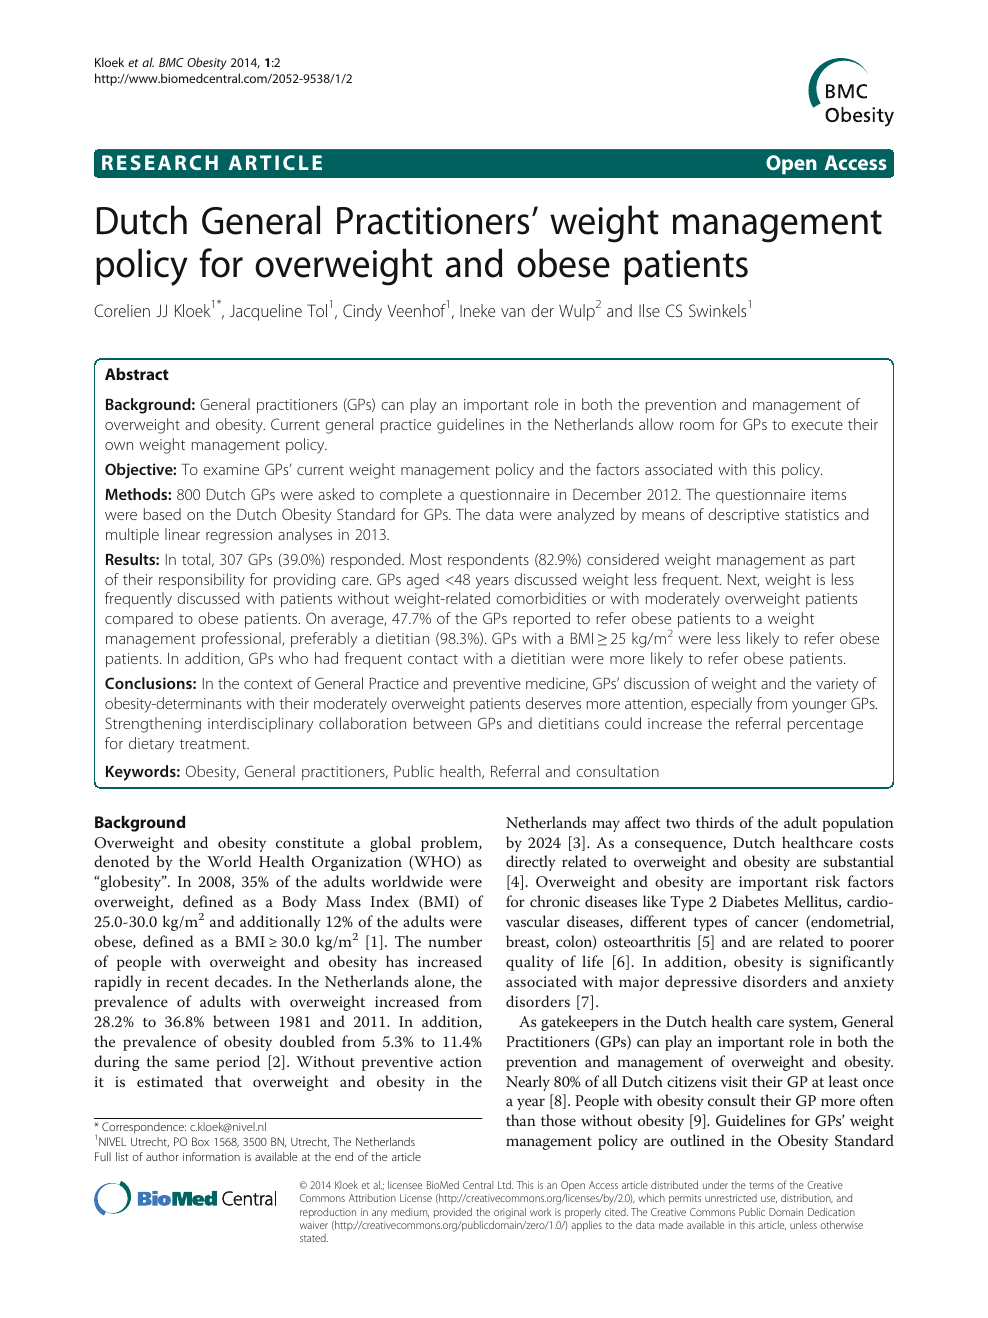 Dutch General Practitioners Weight Management Policy For